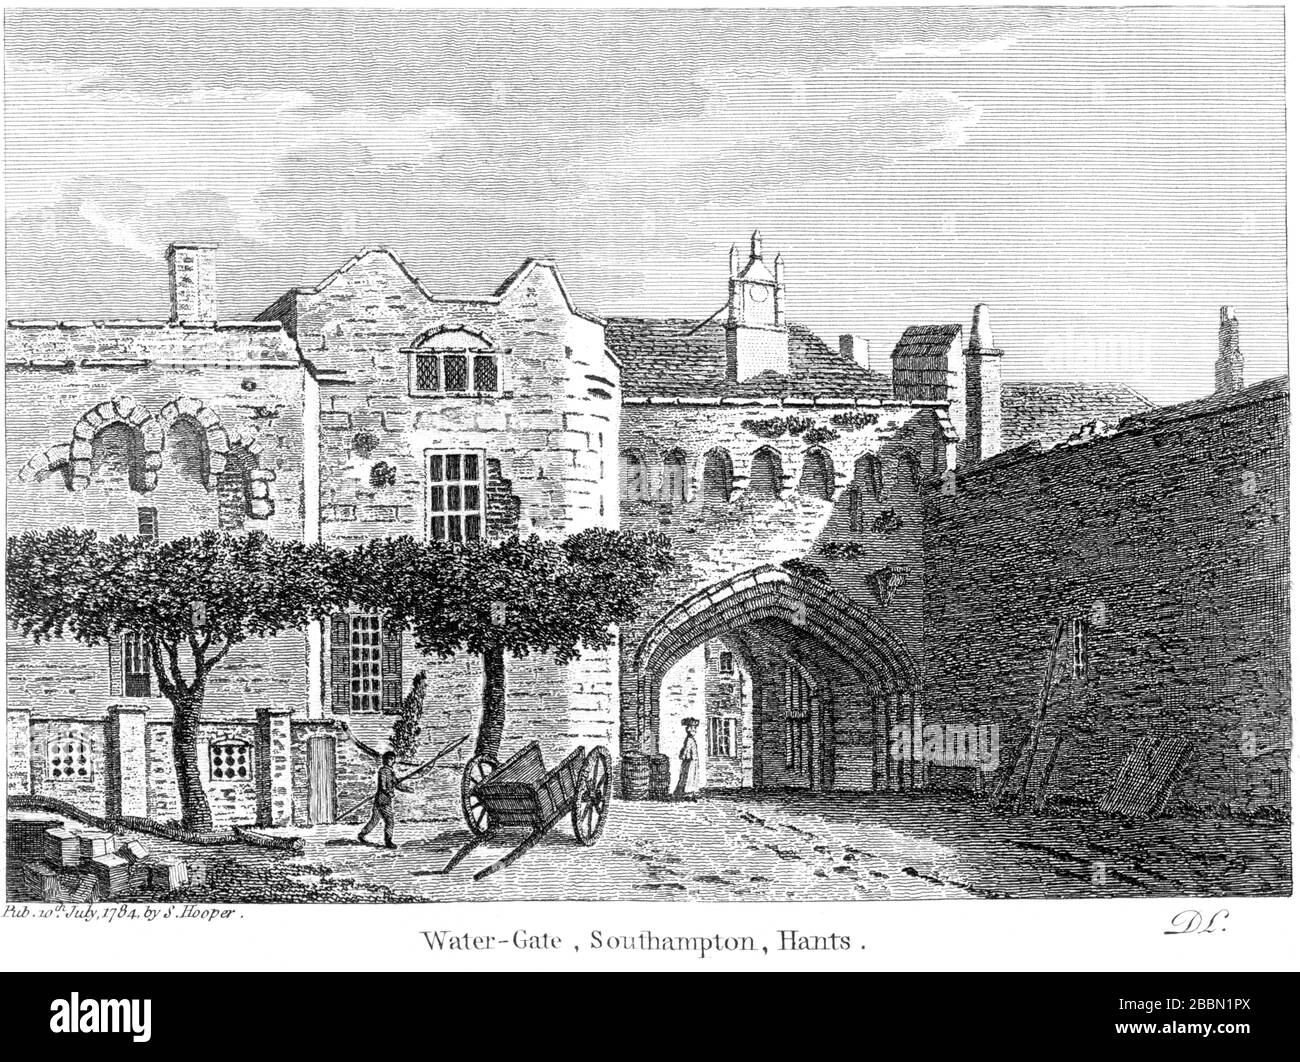 Engraving of the Water-Gate (Watergate), Southampton, Hants 1784 scanned at high resolution from a book published around 1786. Believed copyright free Stock Photo